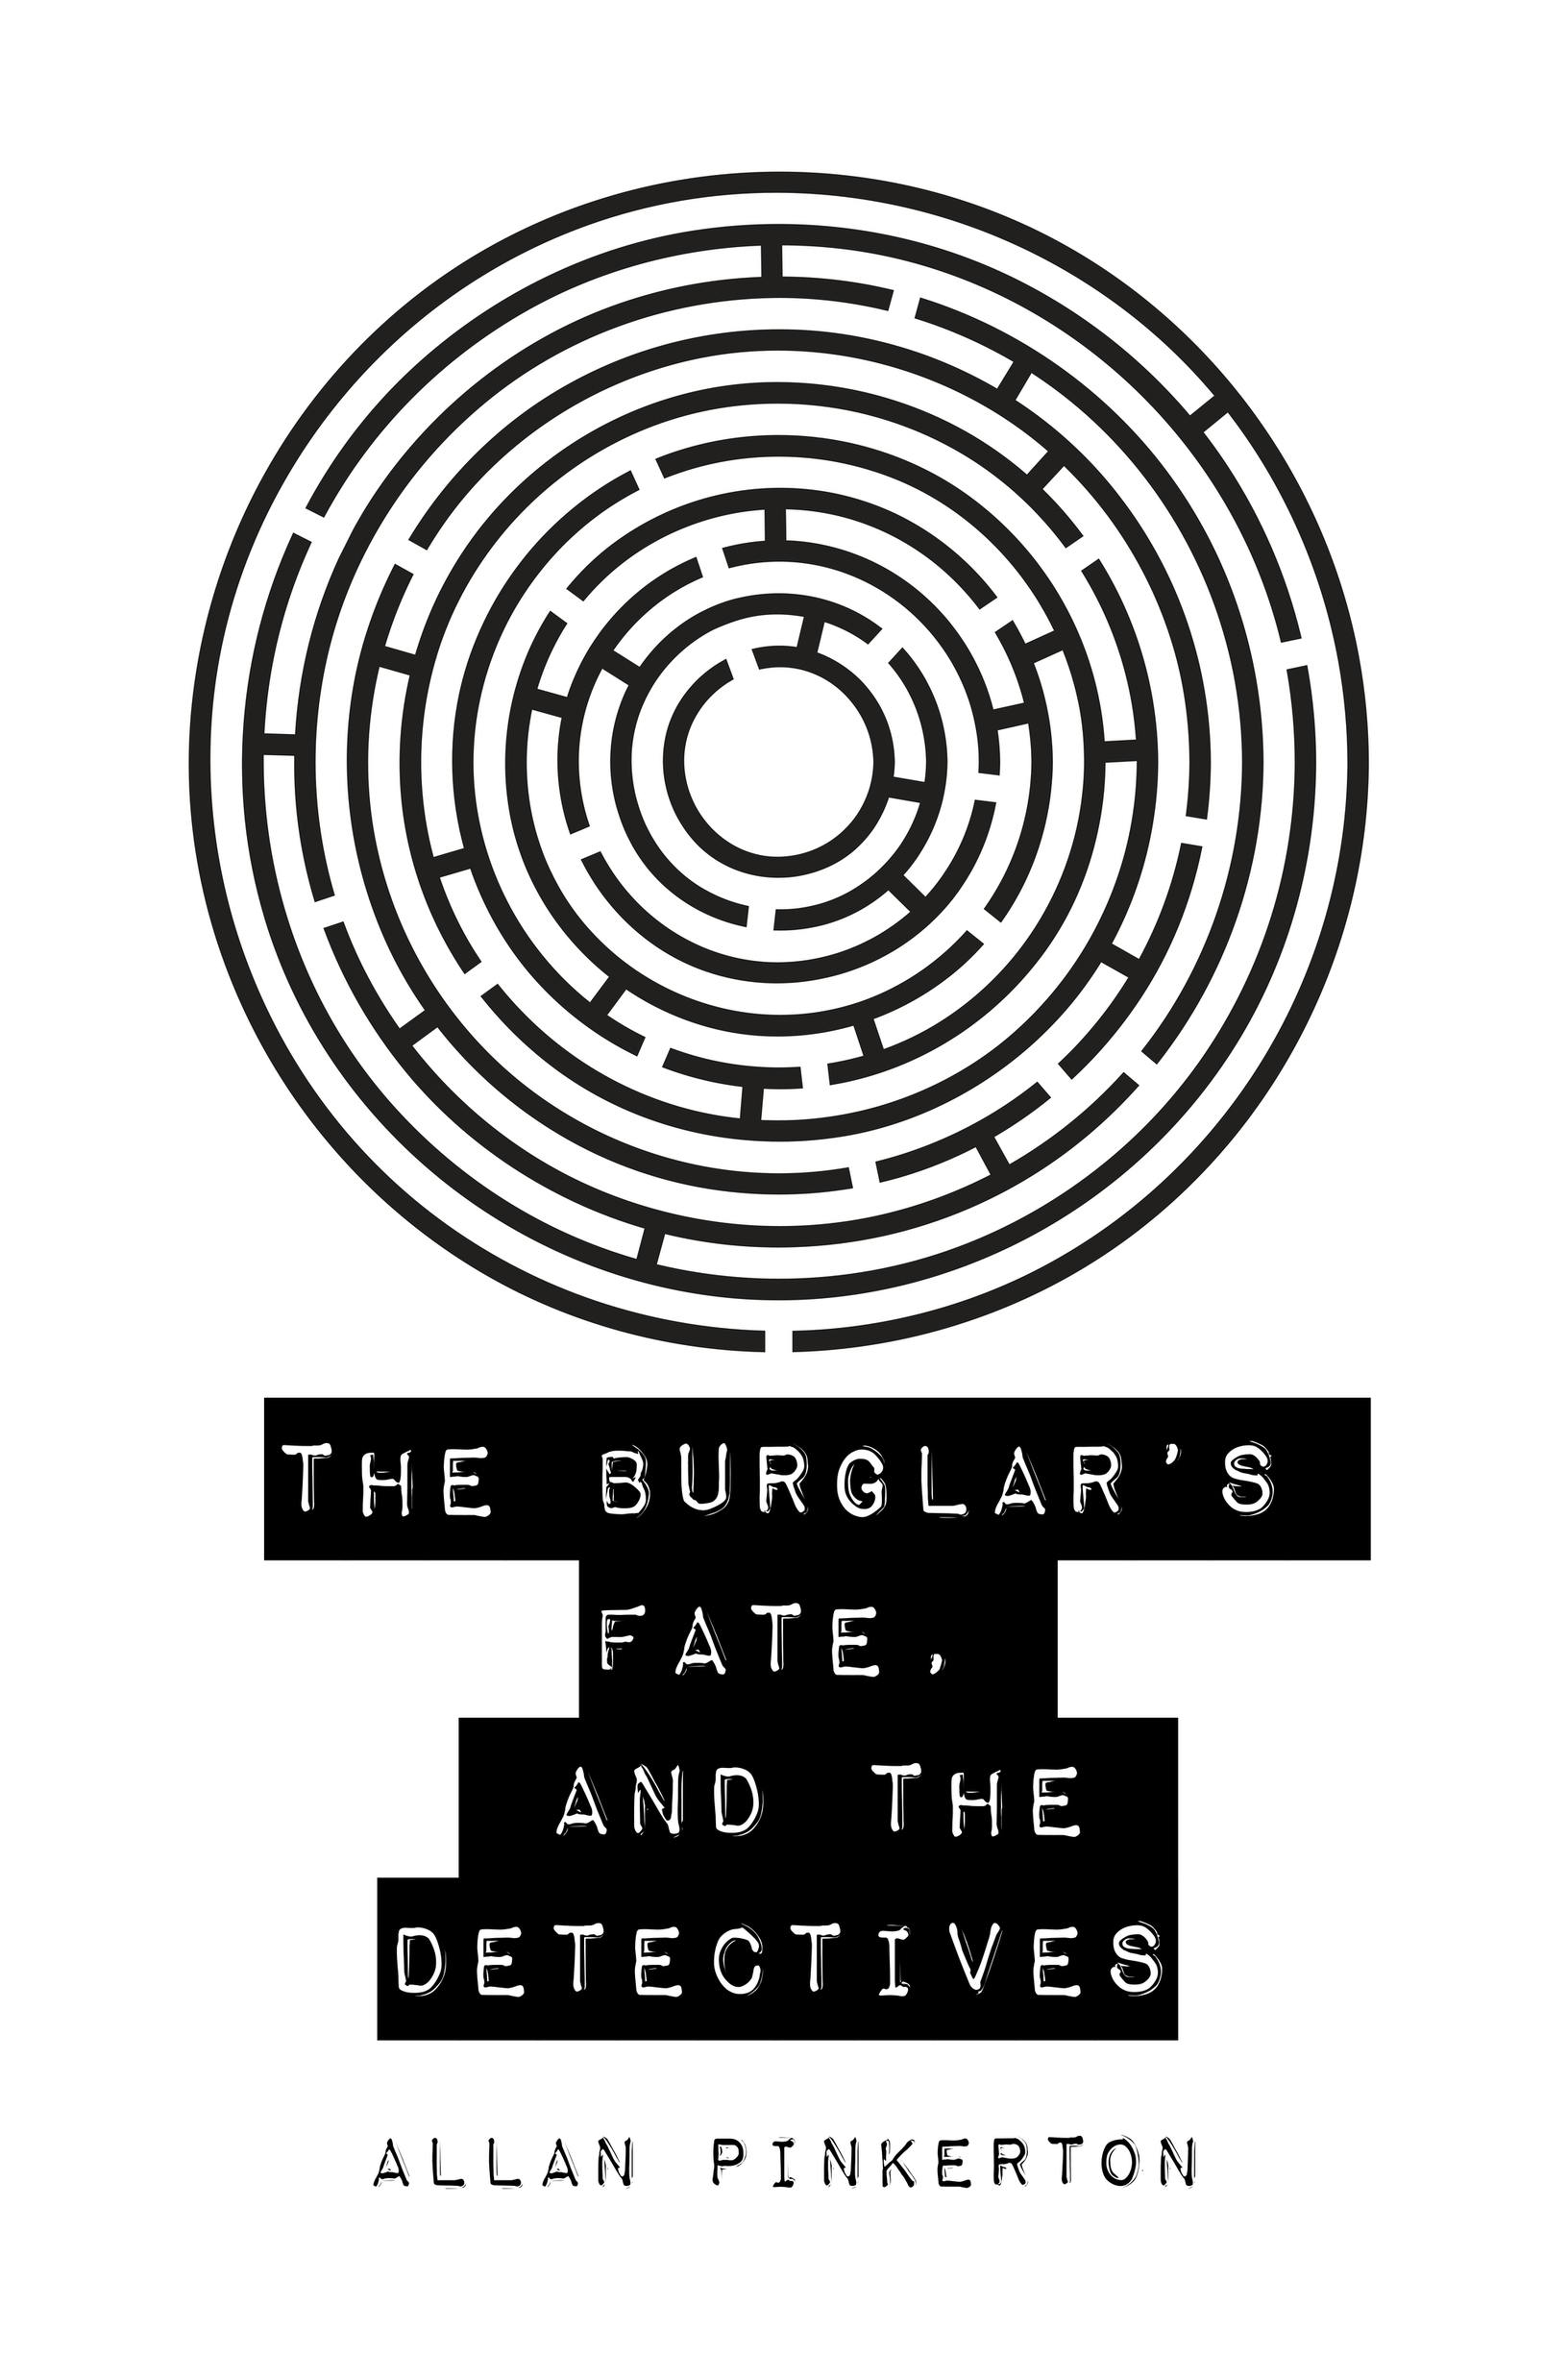 The Burglar's Fate, and The Detectives - Allan Pinkerton